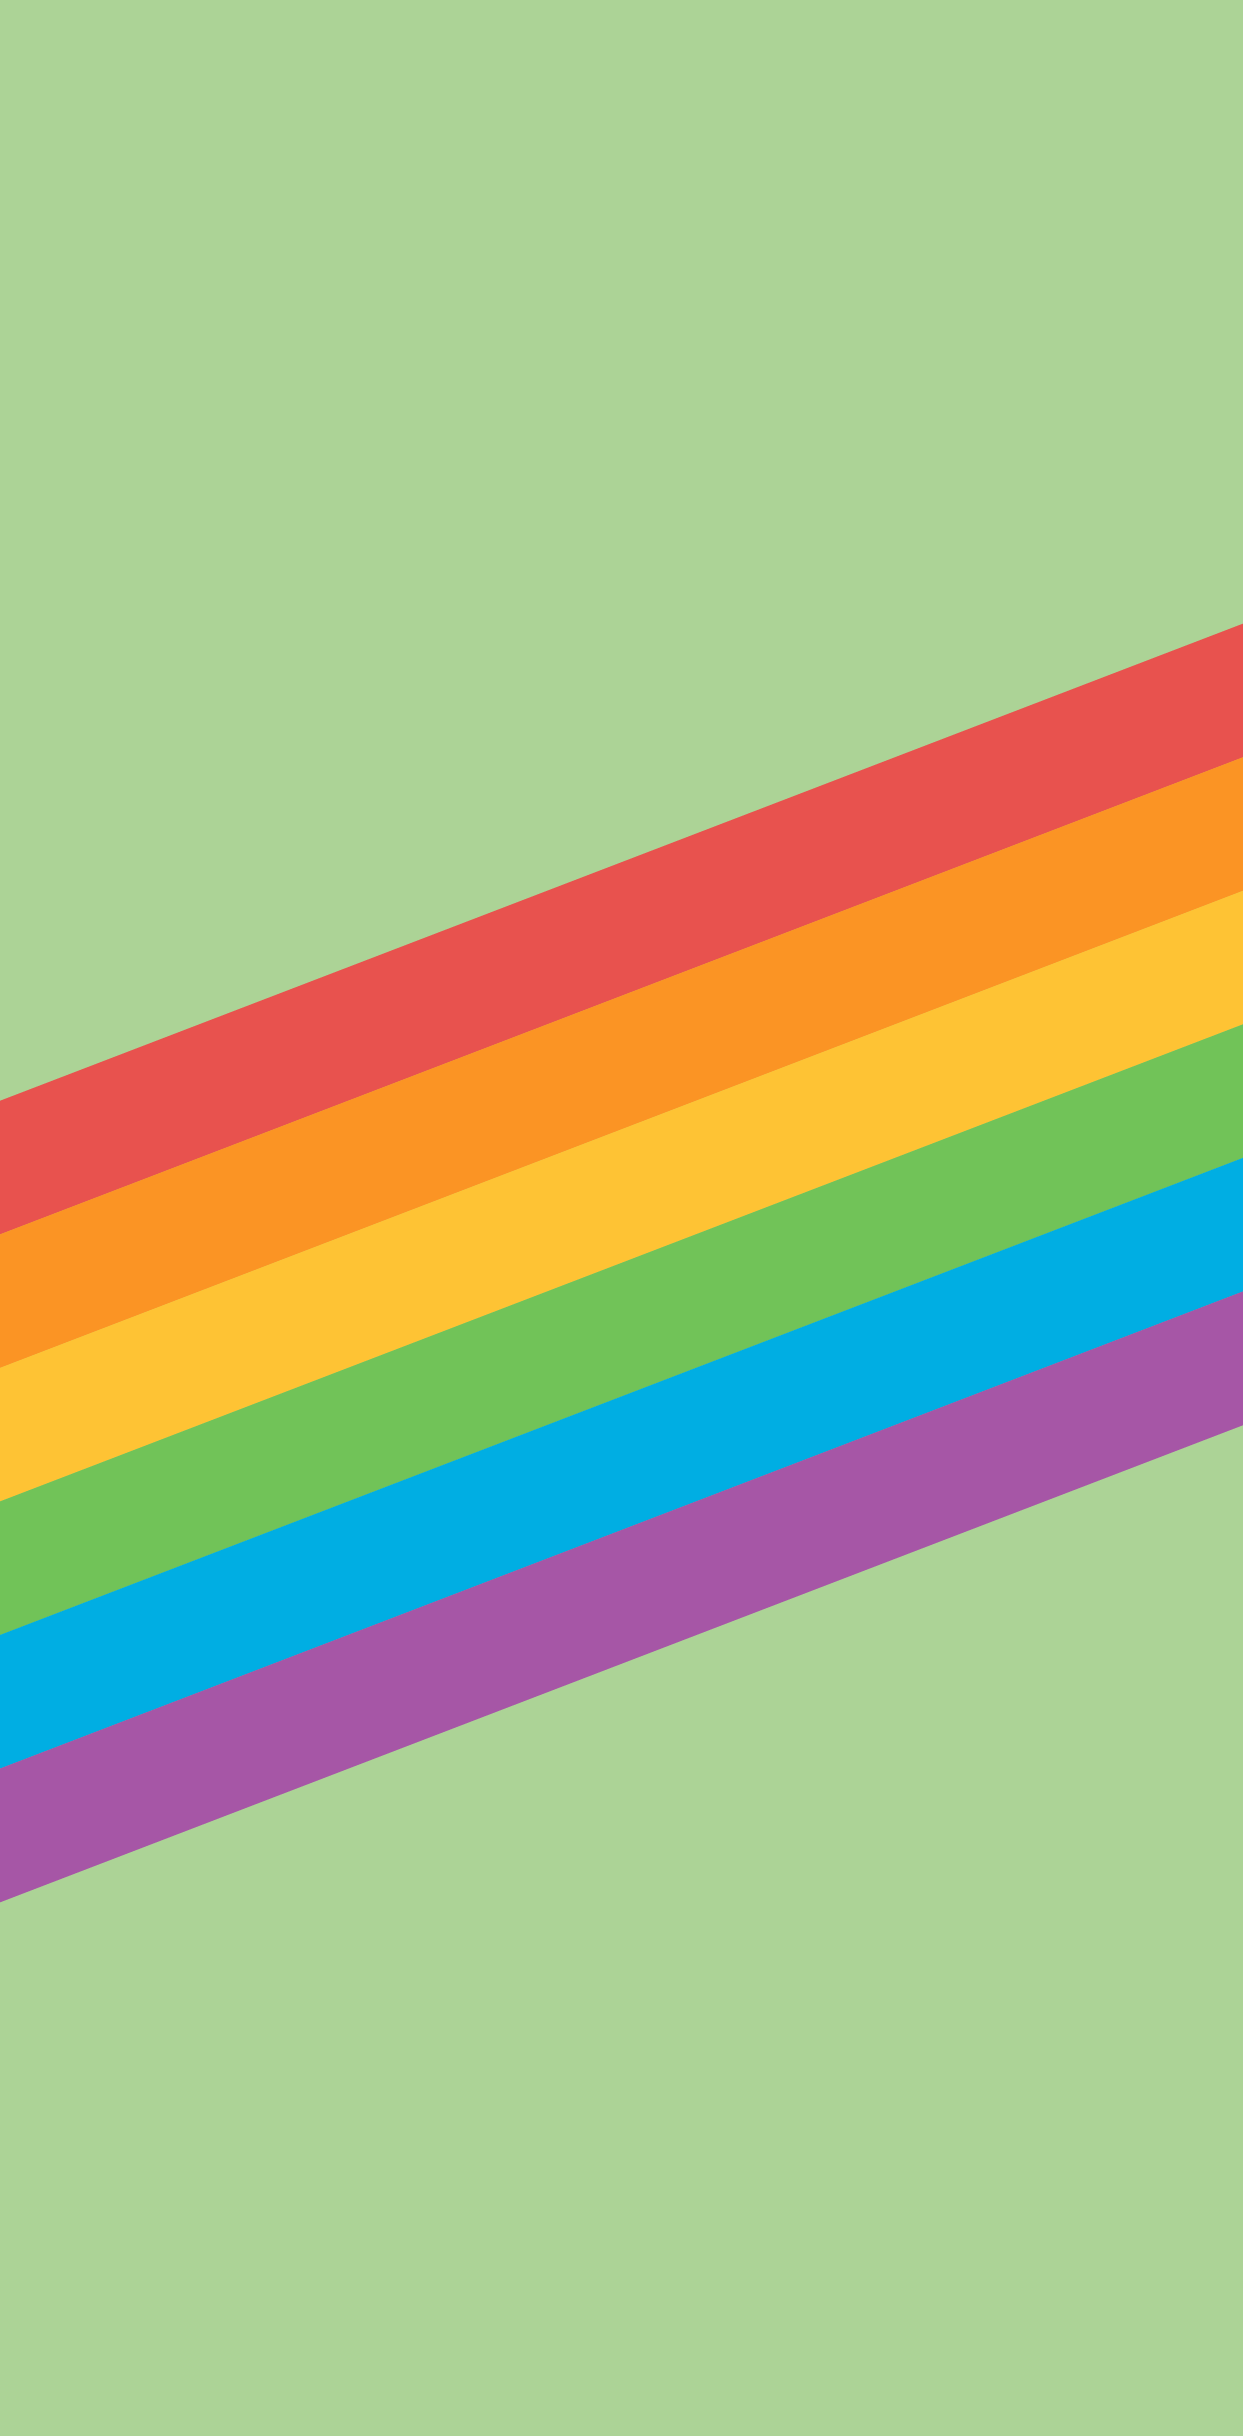 A green background with a rainbow stripe pattern in the center - Pride